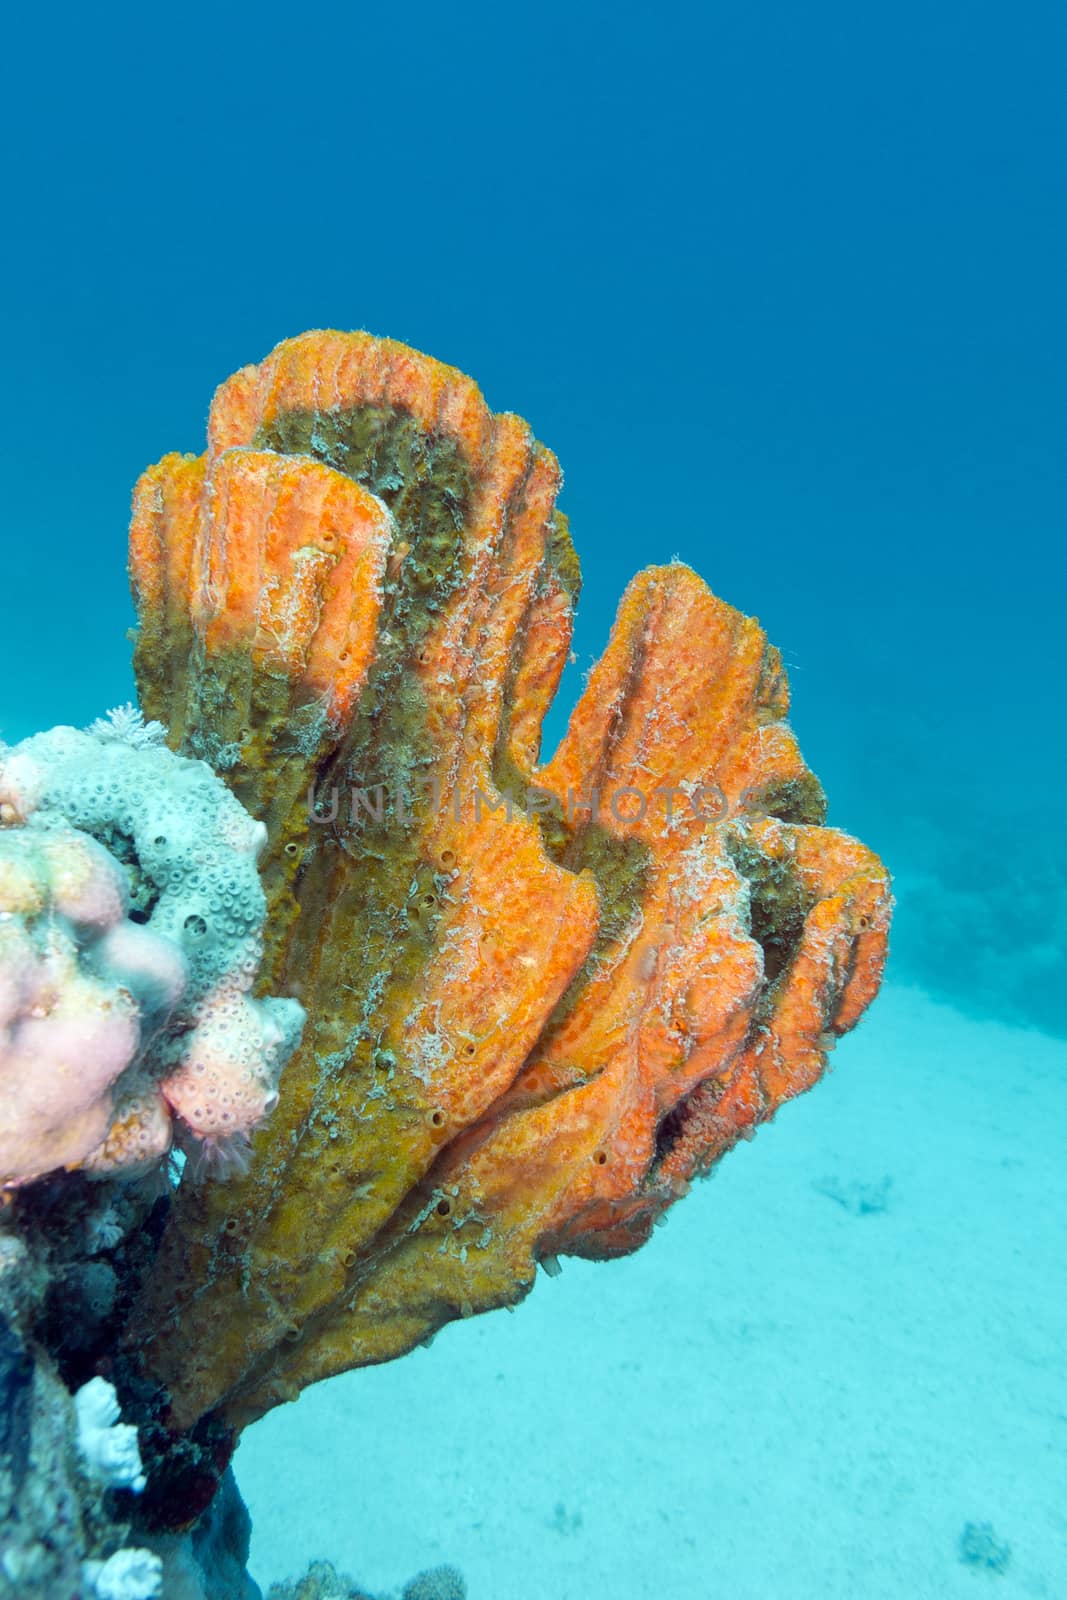 coral reef with beautiful great orange sponge in tropical sea by mychadre77